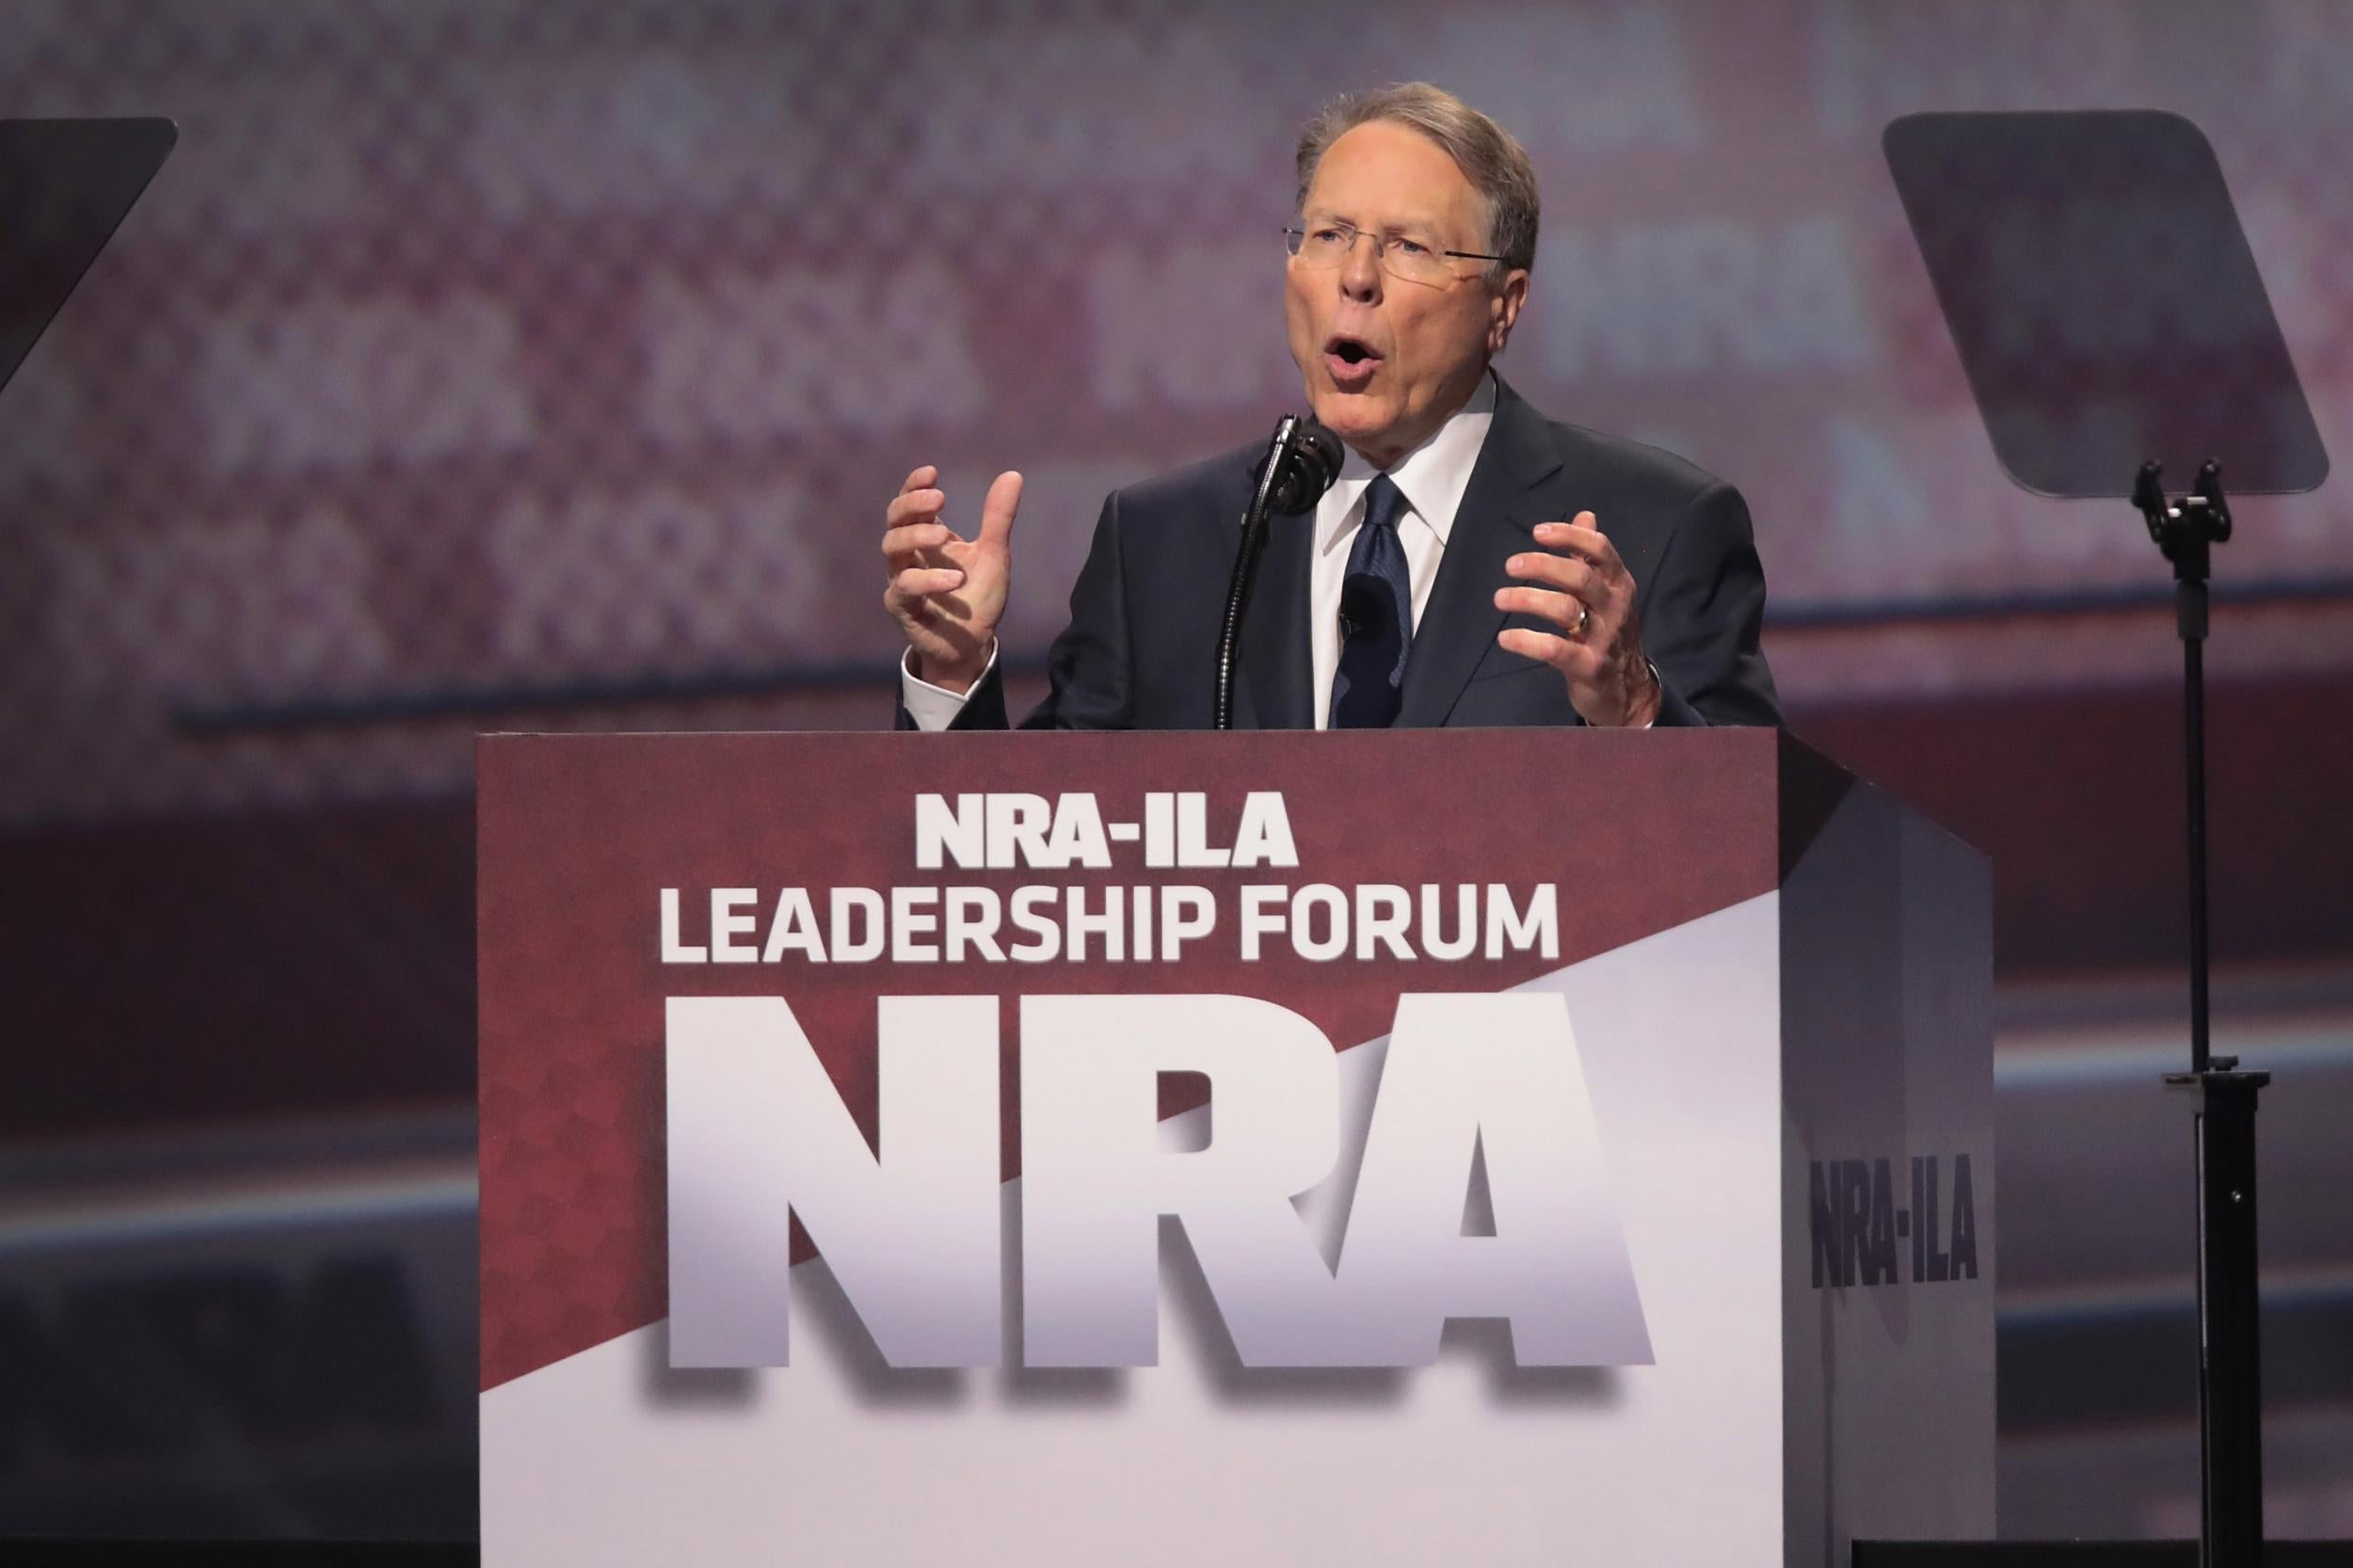 The longtime head of the National Rifle Association is allegedly under investigation by the Internal Revenue Service for possible tax fraud, according to reports.